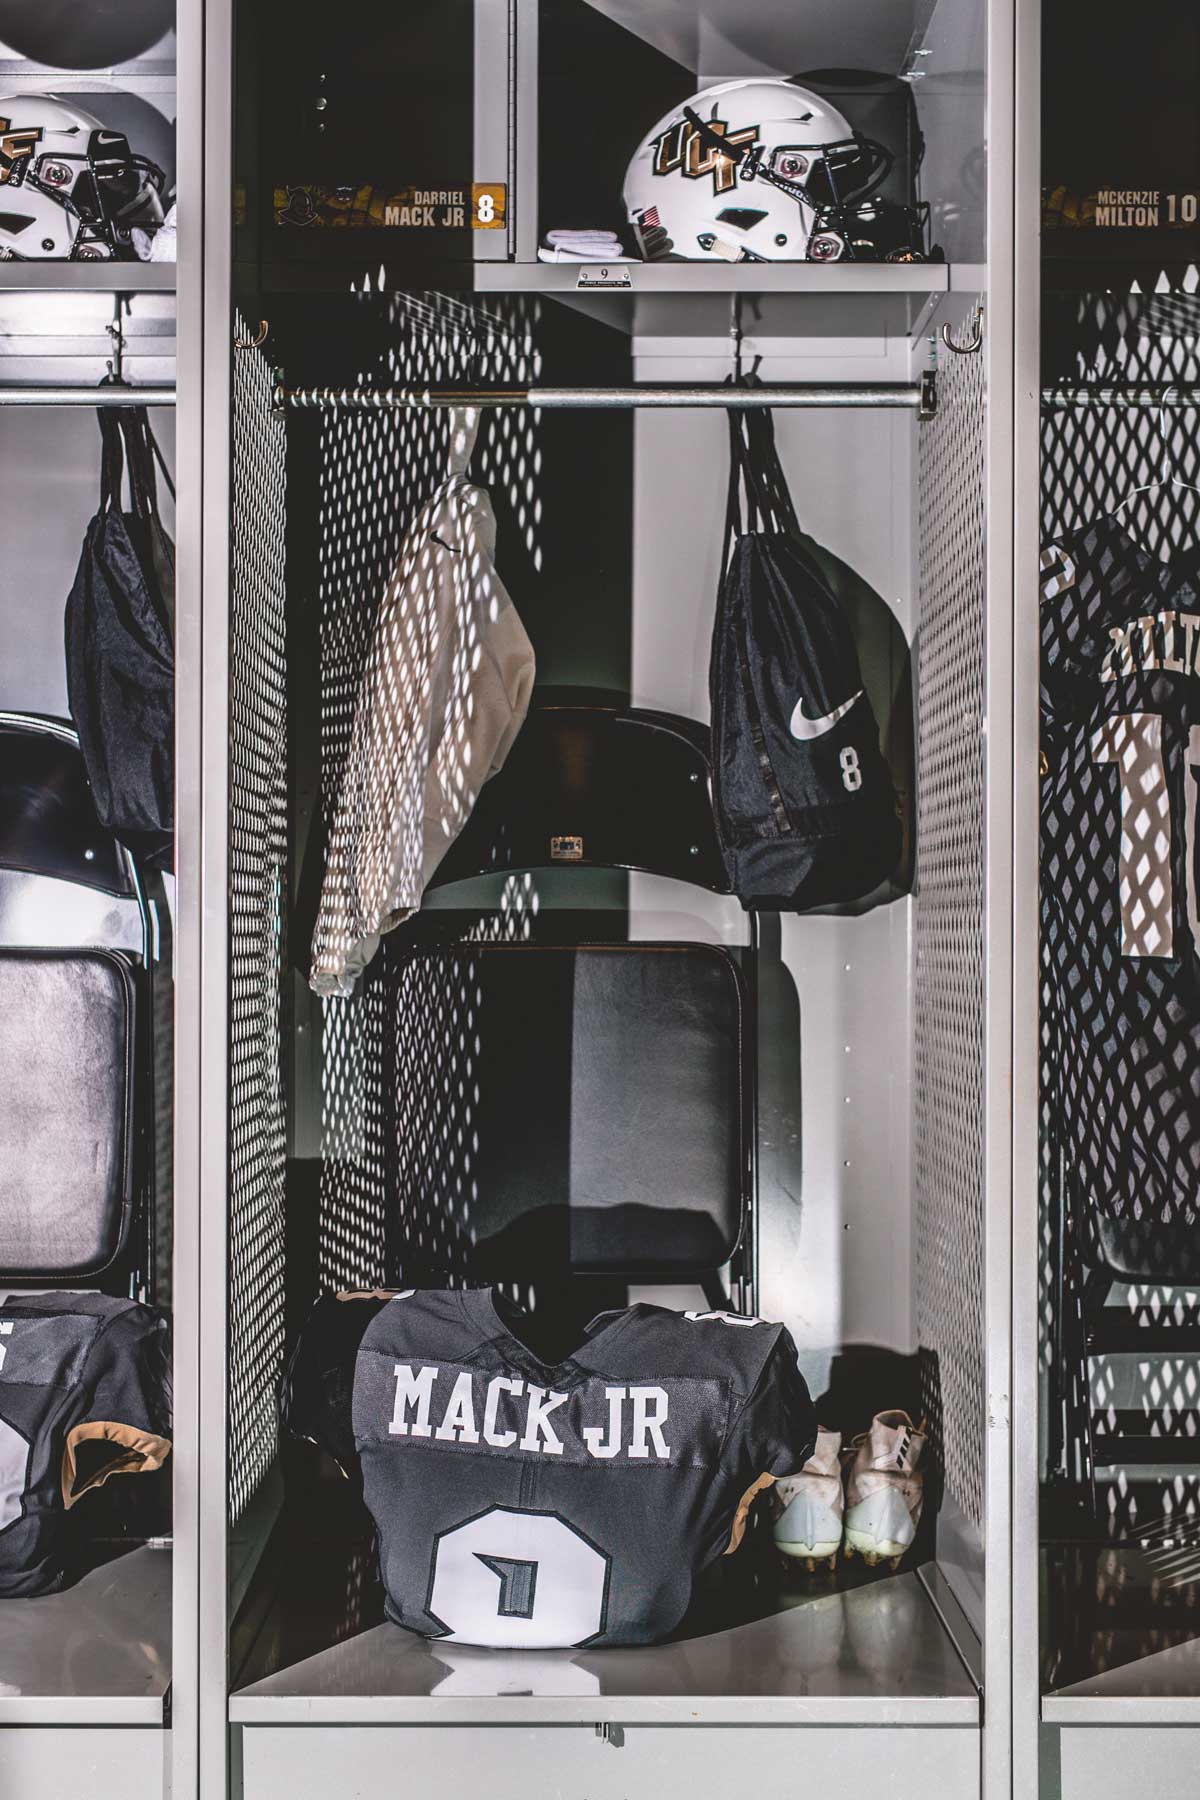 single locker with a black jersey and a Nike bag hanging